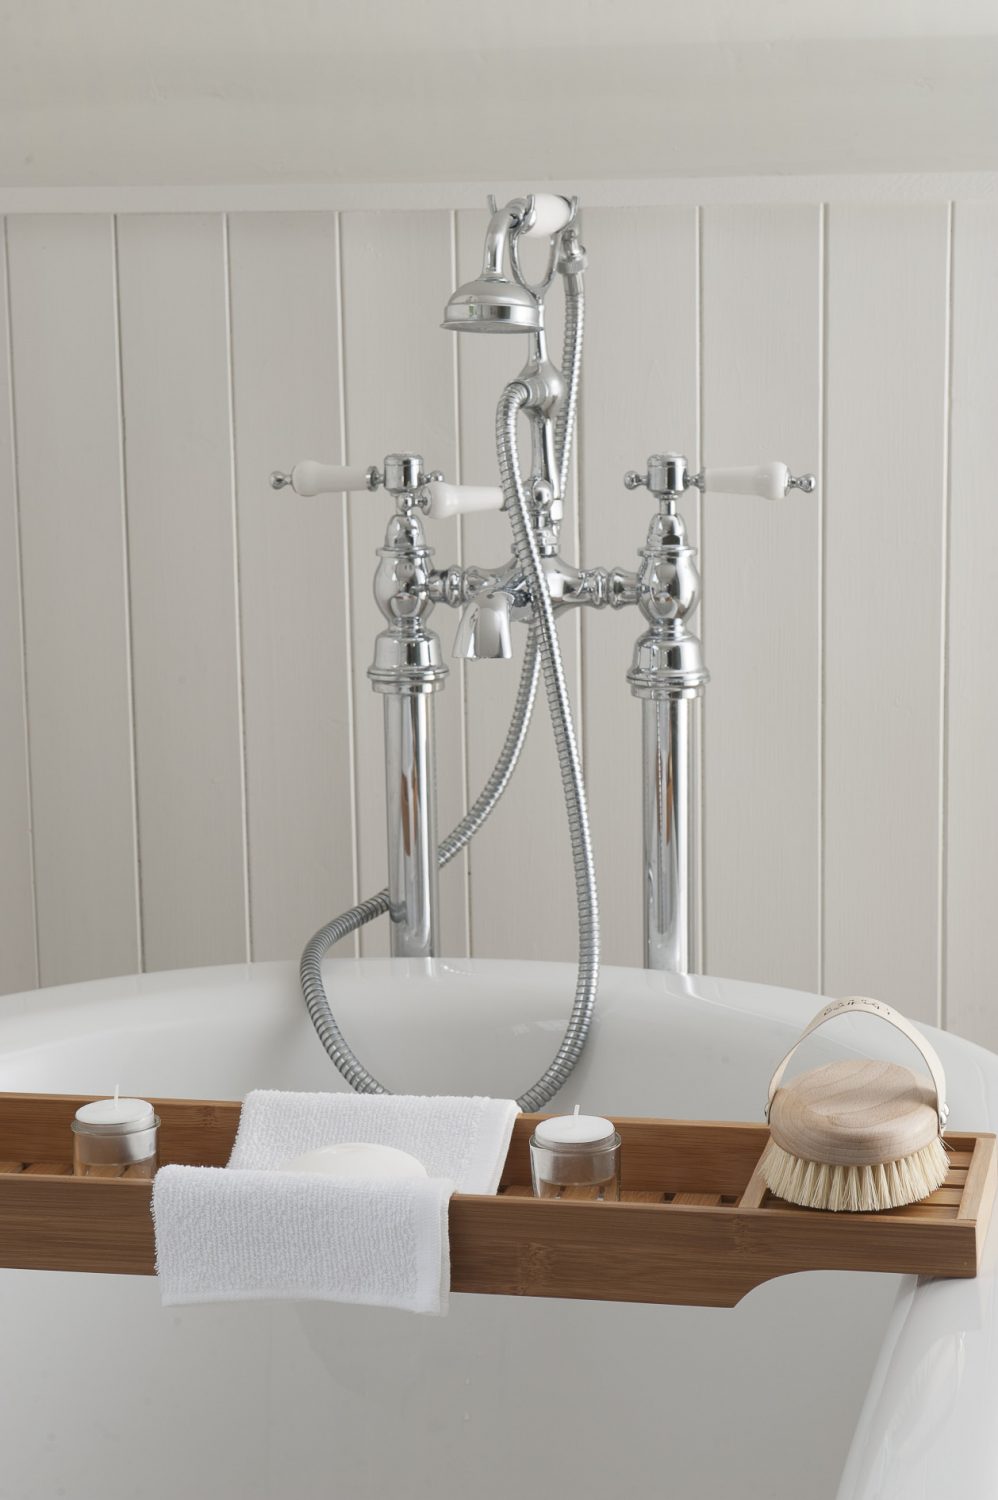 Victorian-style taps adorn the end of a freestanding, roll-top bath